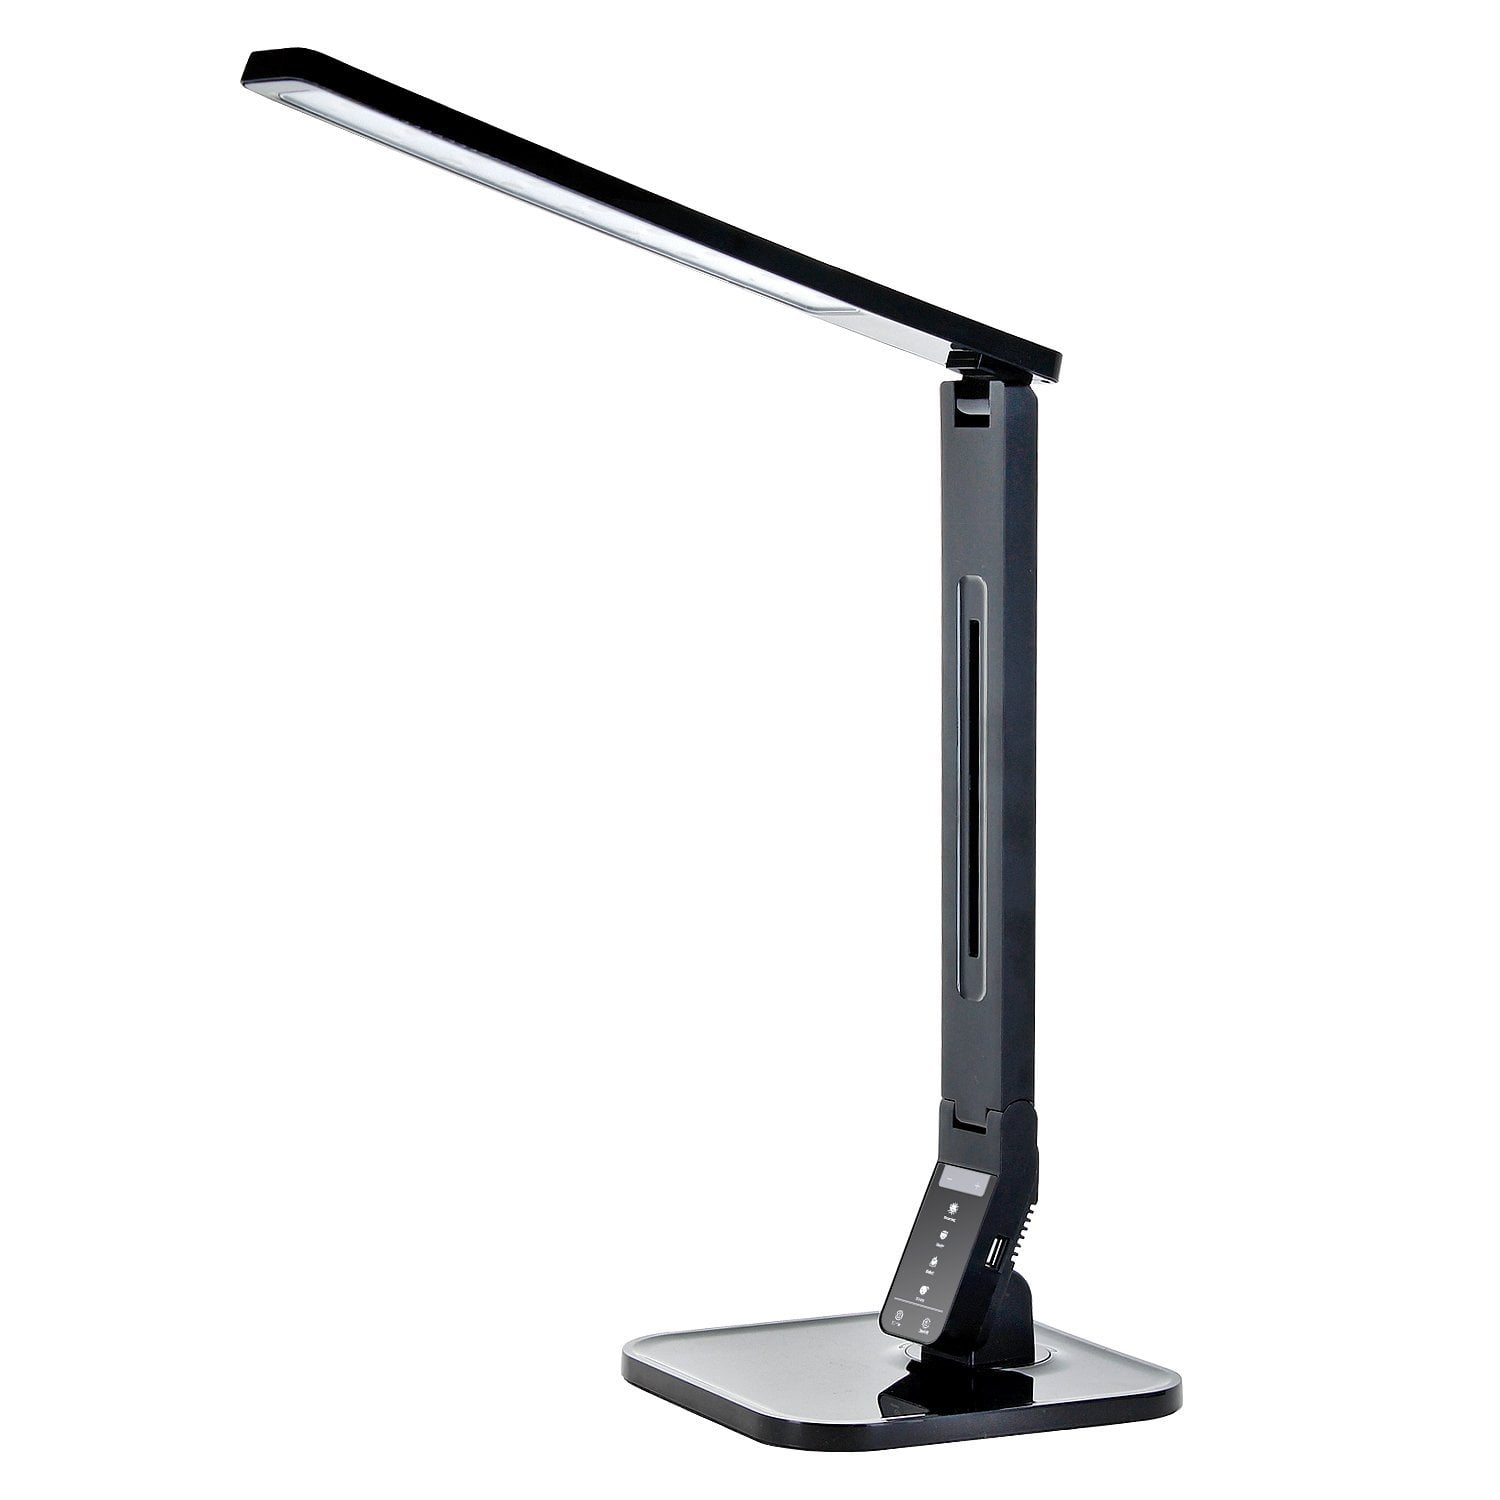 Tenergy 11w Dimmable Led Desk Lamp With, Officemax Led Desk Lamps